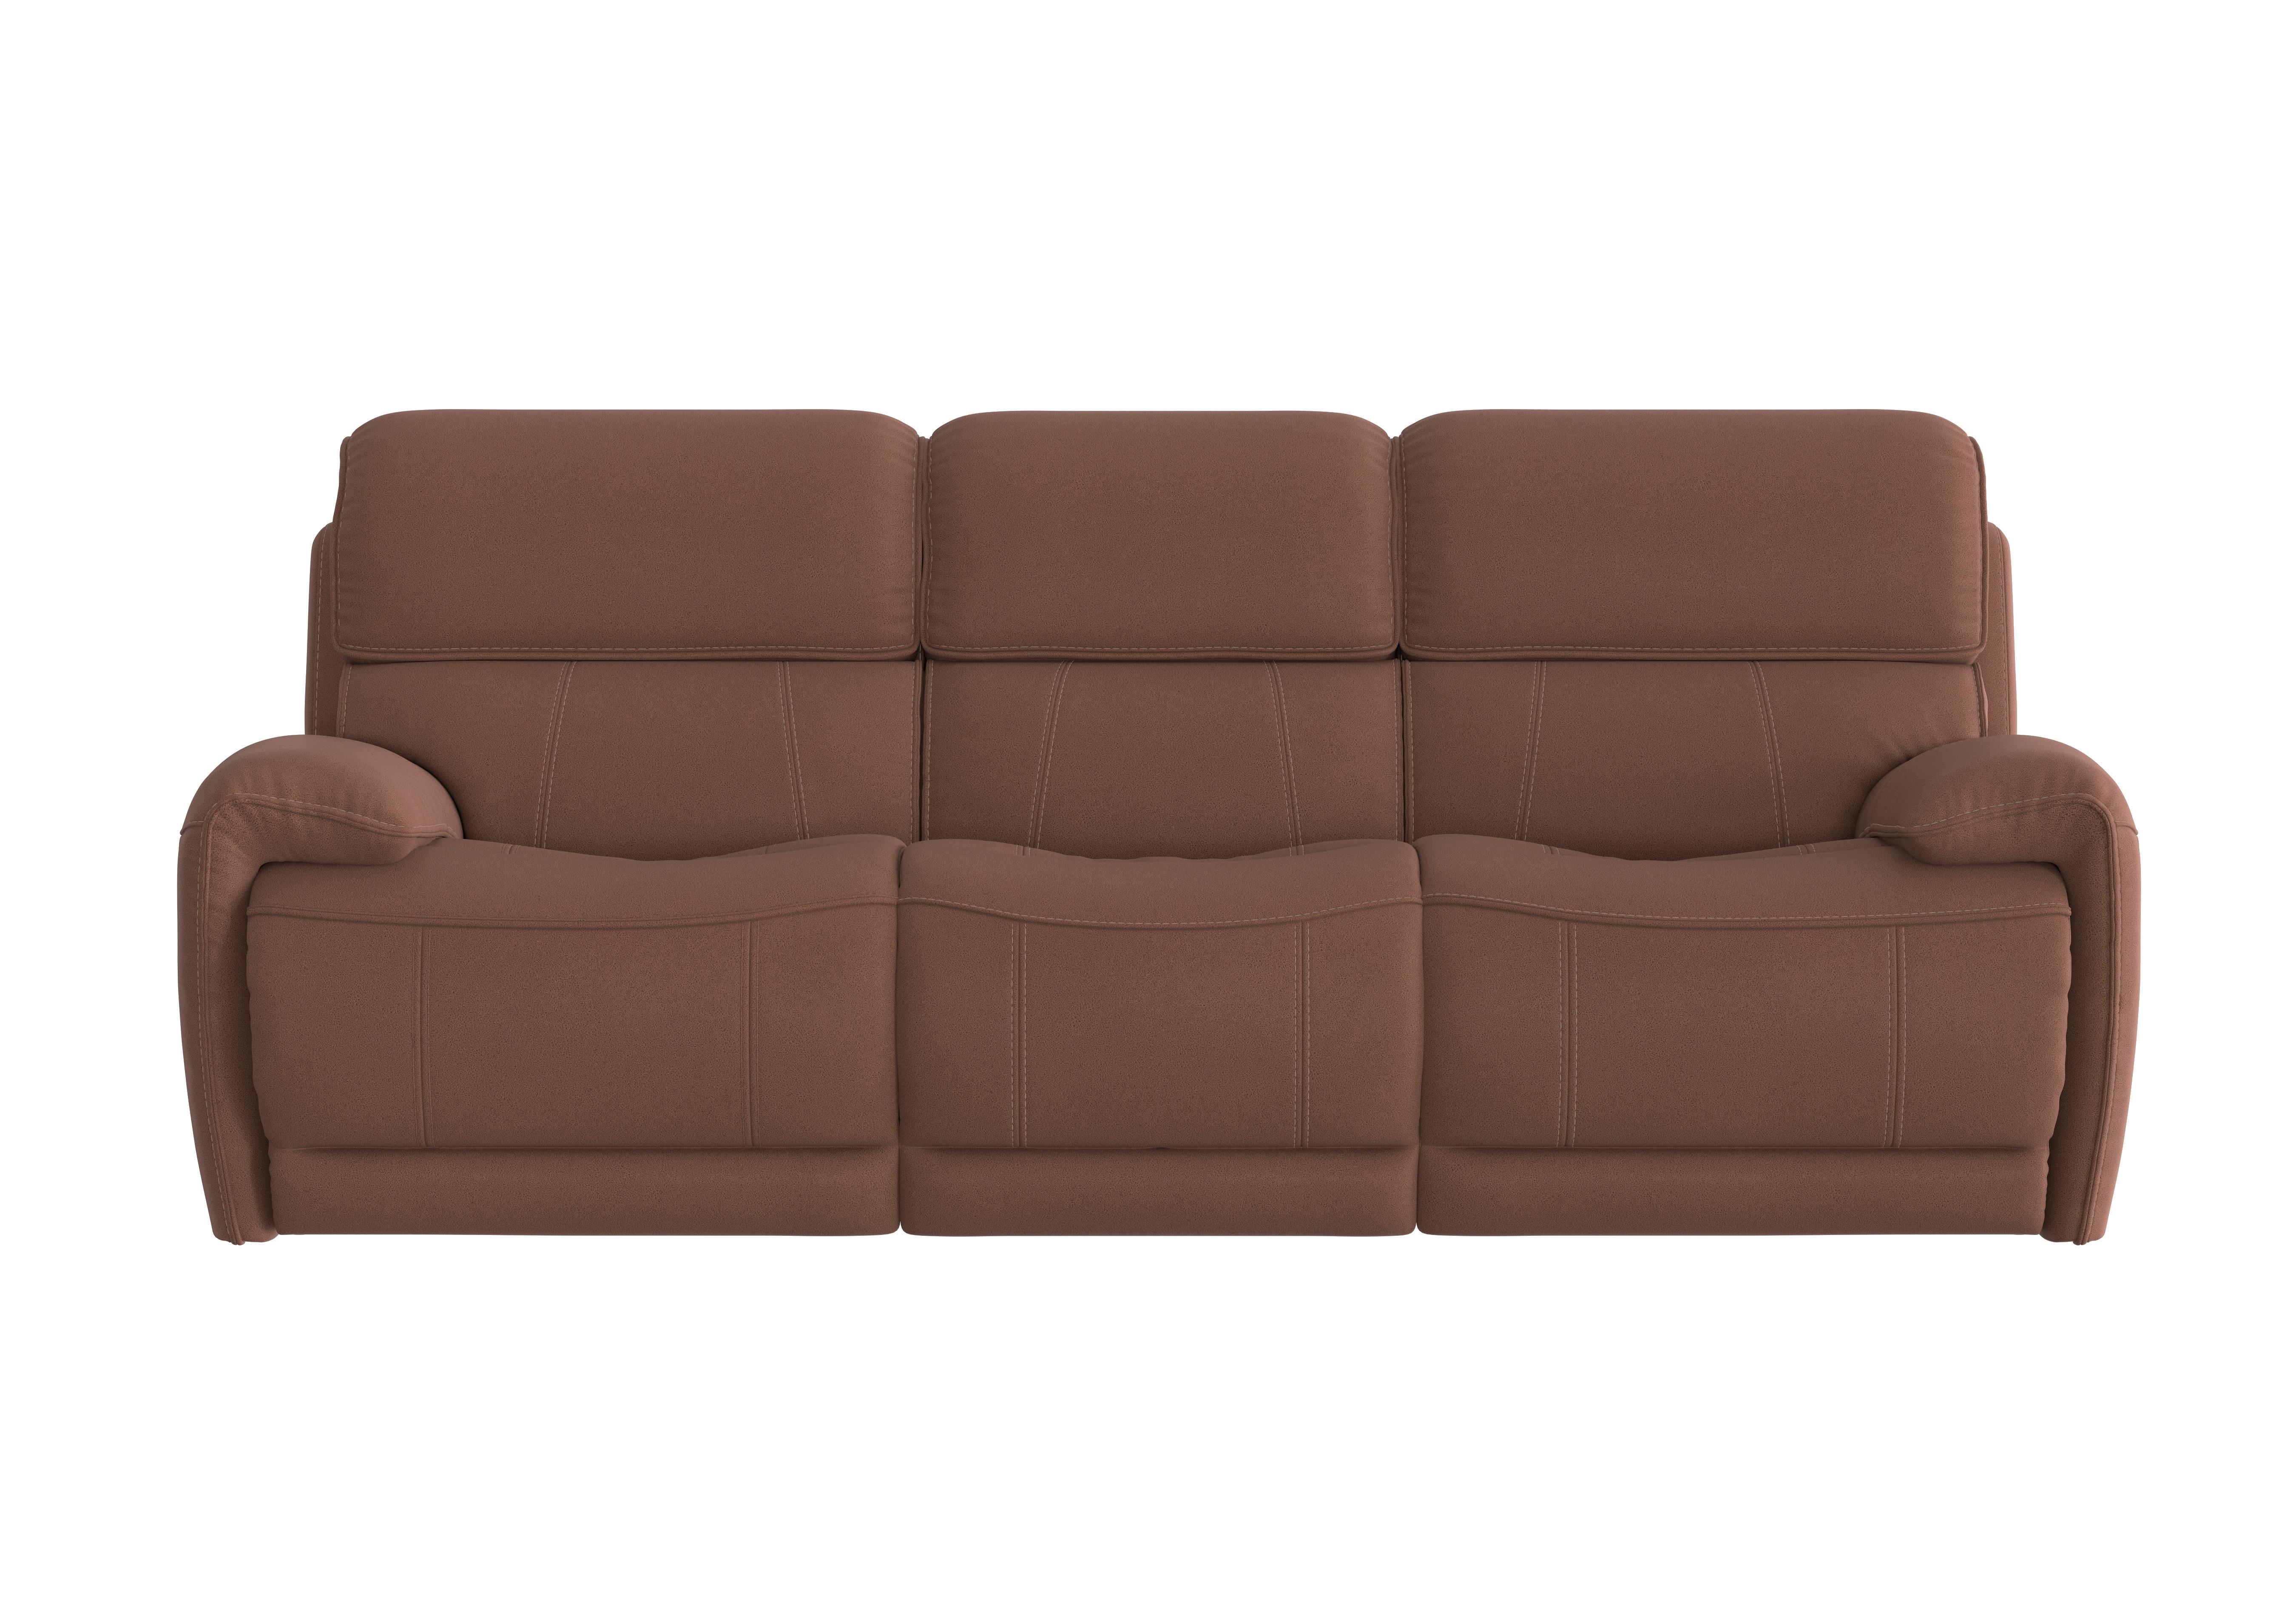 Link 3 Seater Fabric Power Recliner Sofa with Power Headrests in Bfa-Blj-R05 Hazelnut on Furniture Village